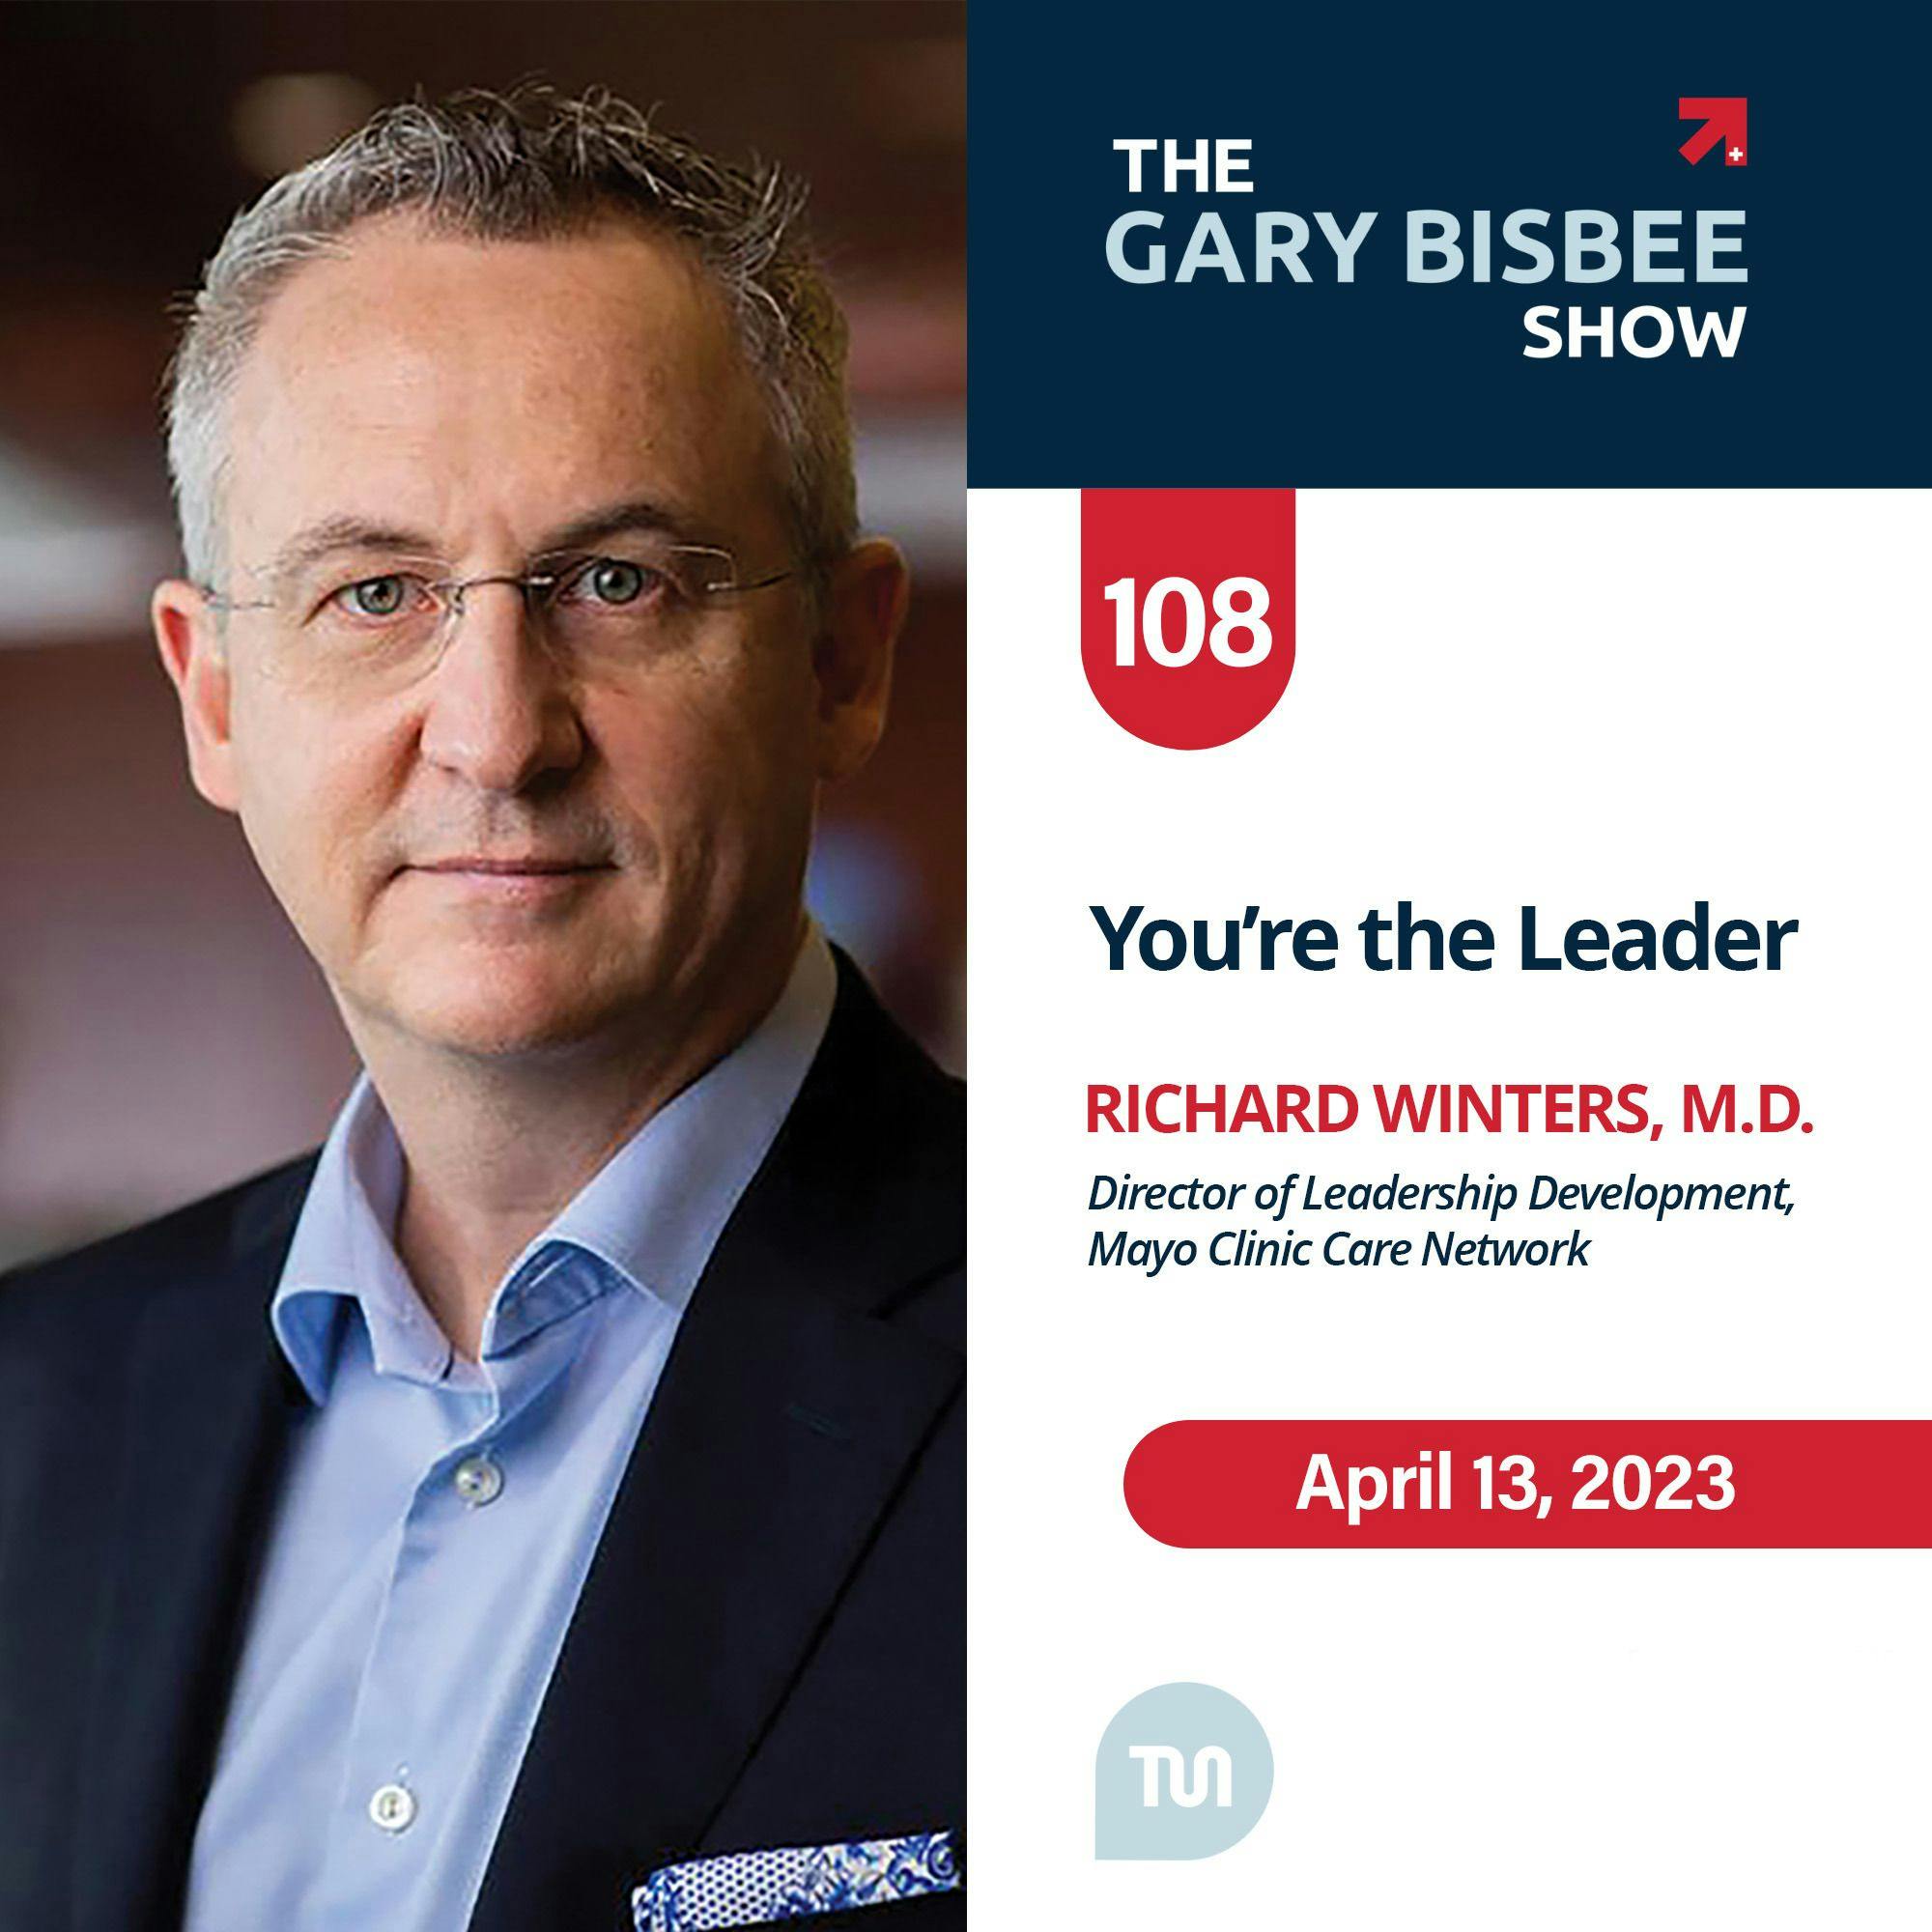 The Gary Bisbee Show: You’re the Leader